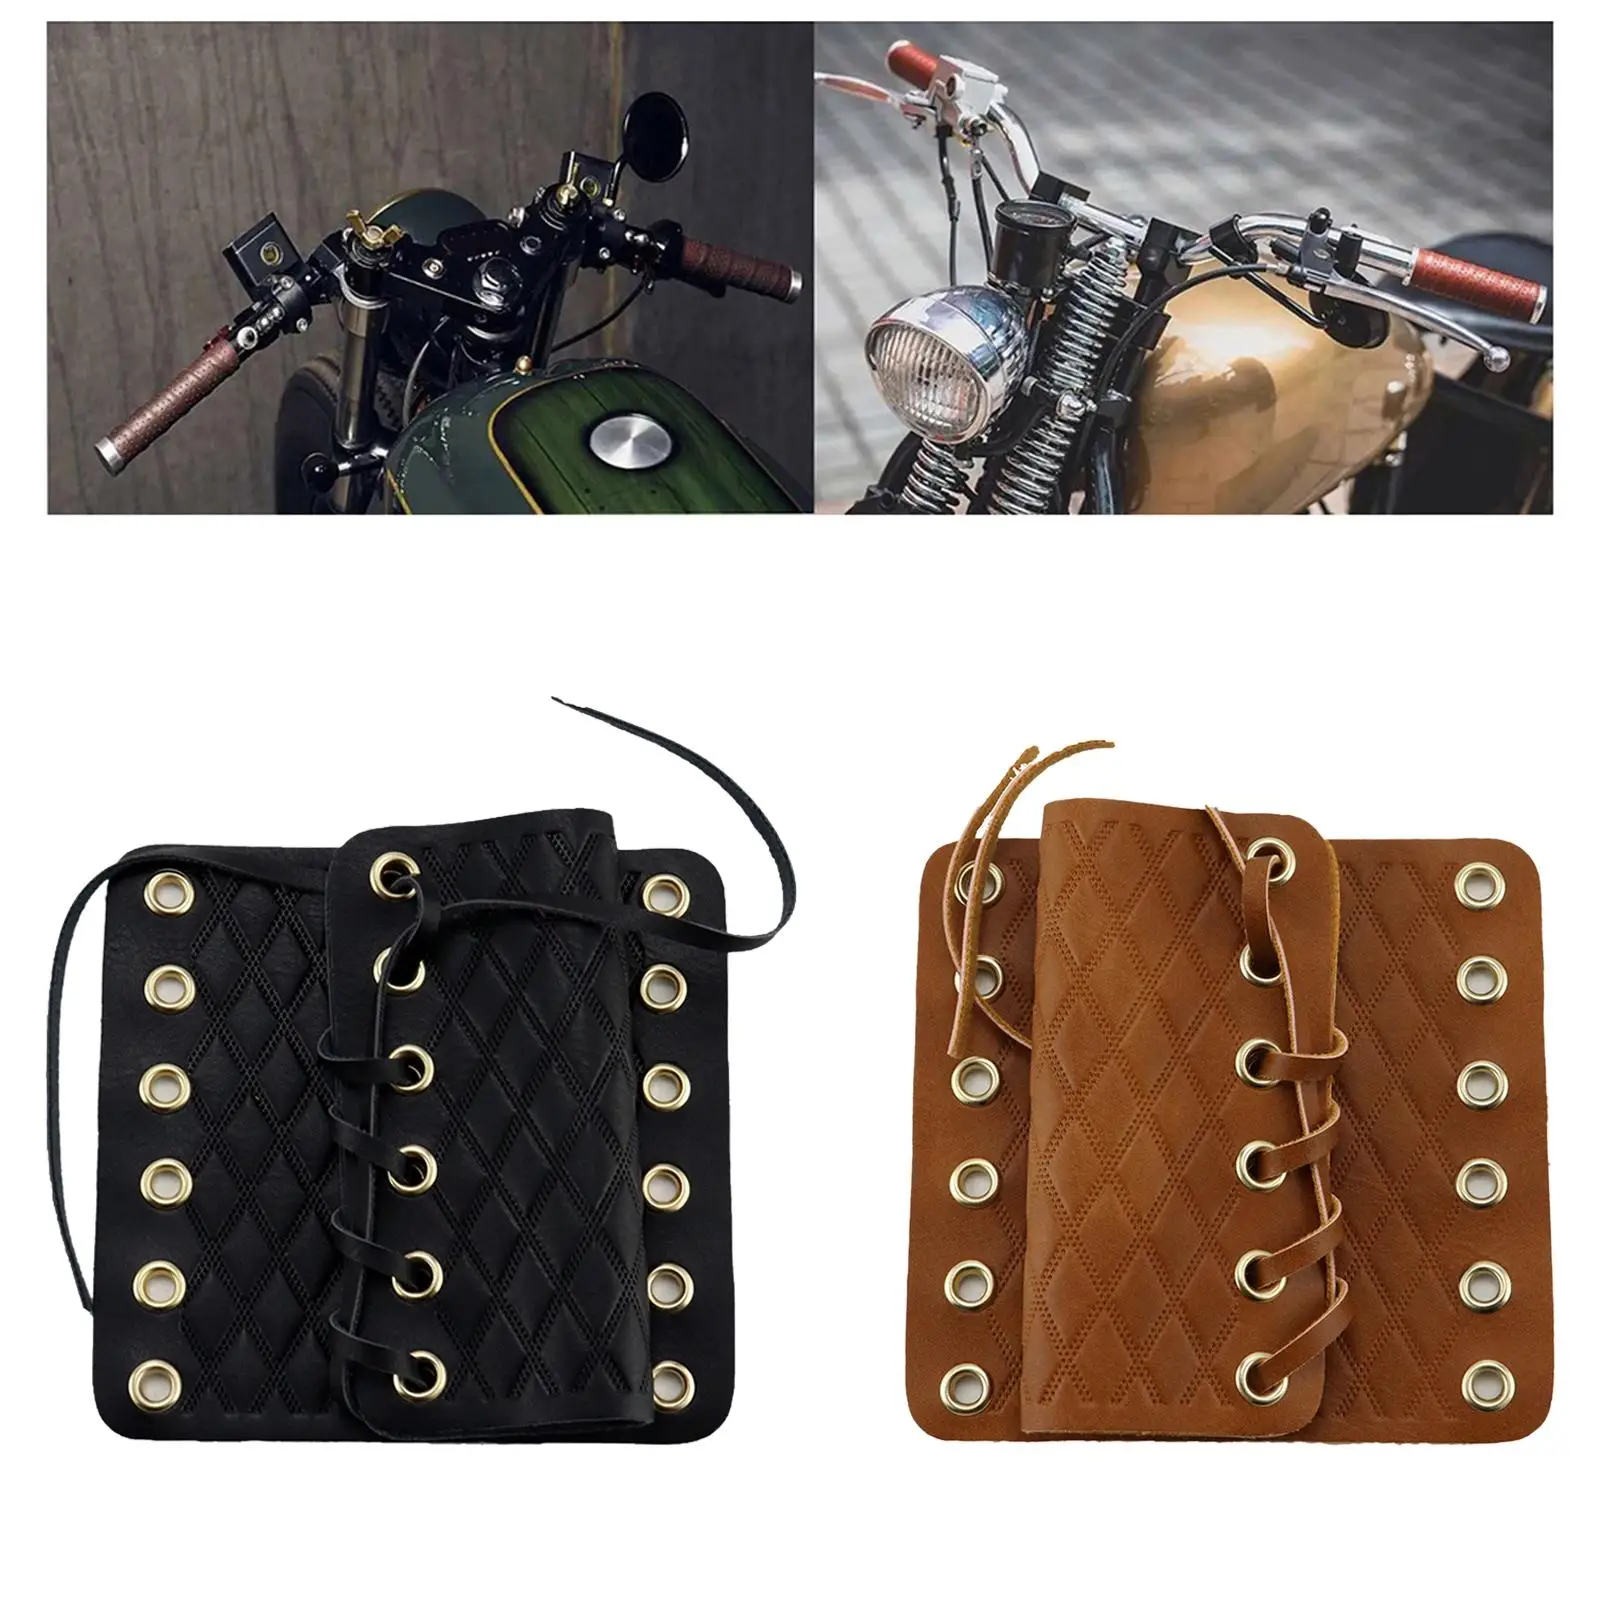 Universal   s Cover, Anti Vibration ,PU Leather ,Adjustable   Wraps for  Motorbikes All s